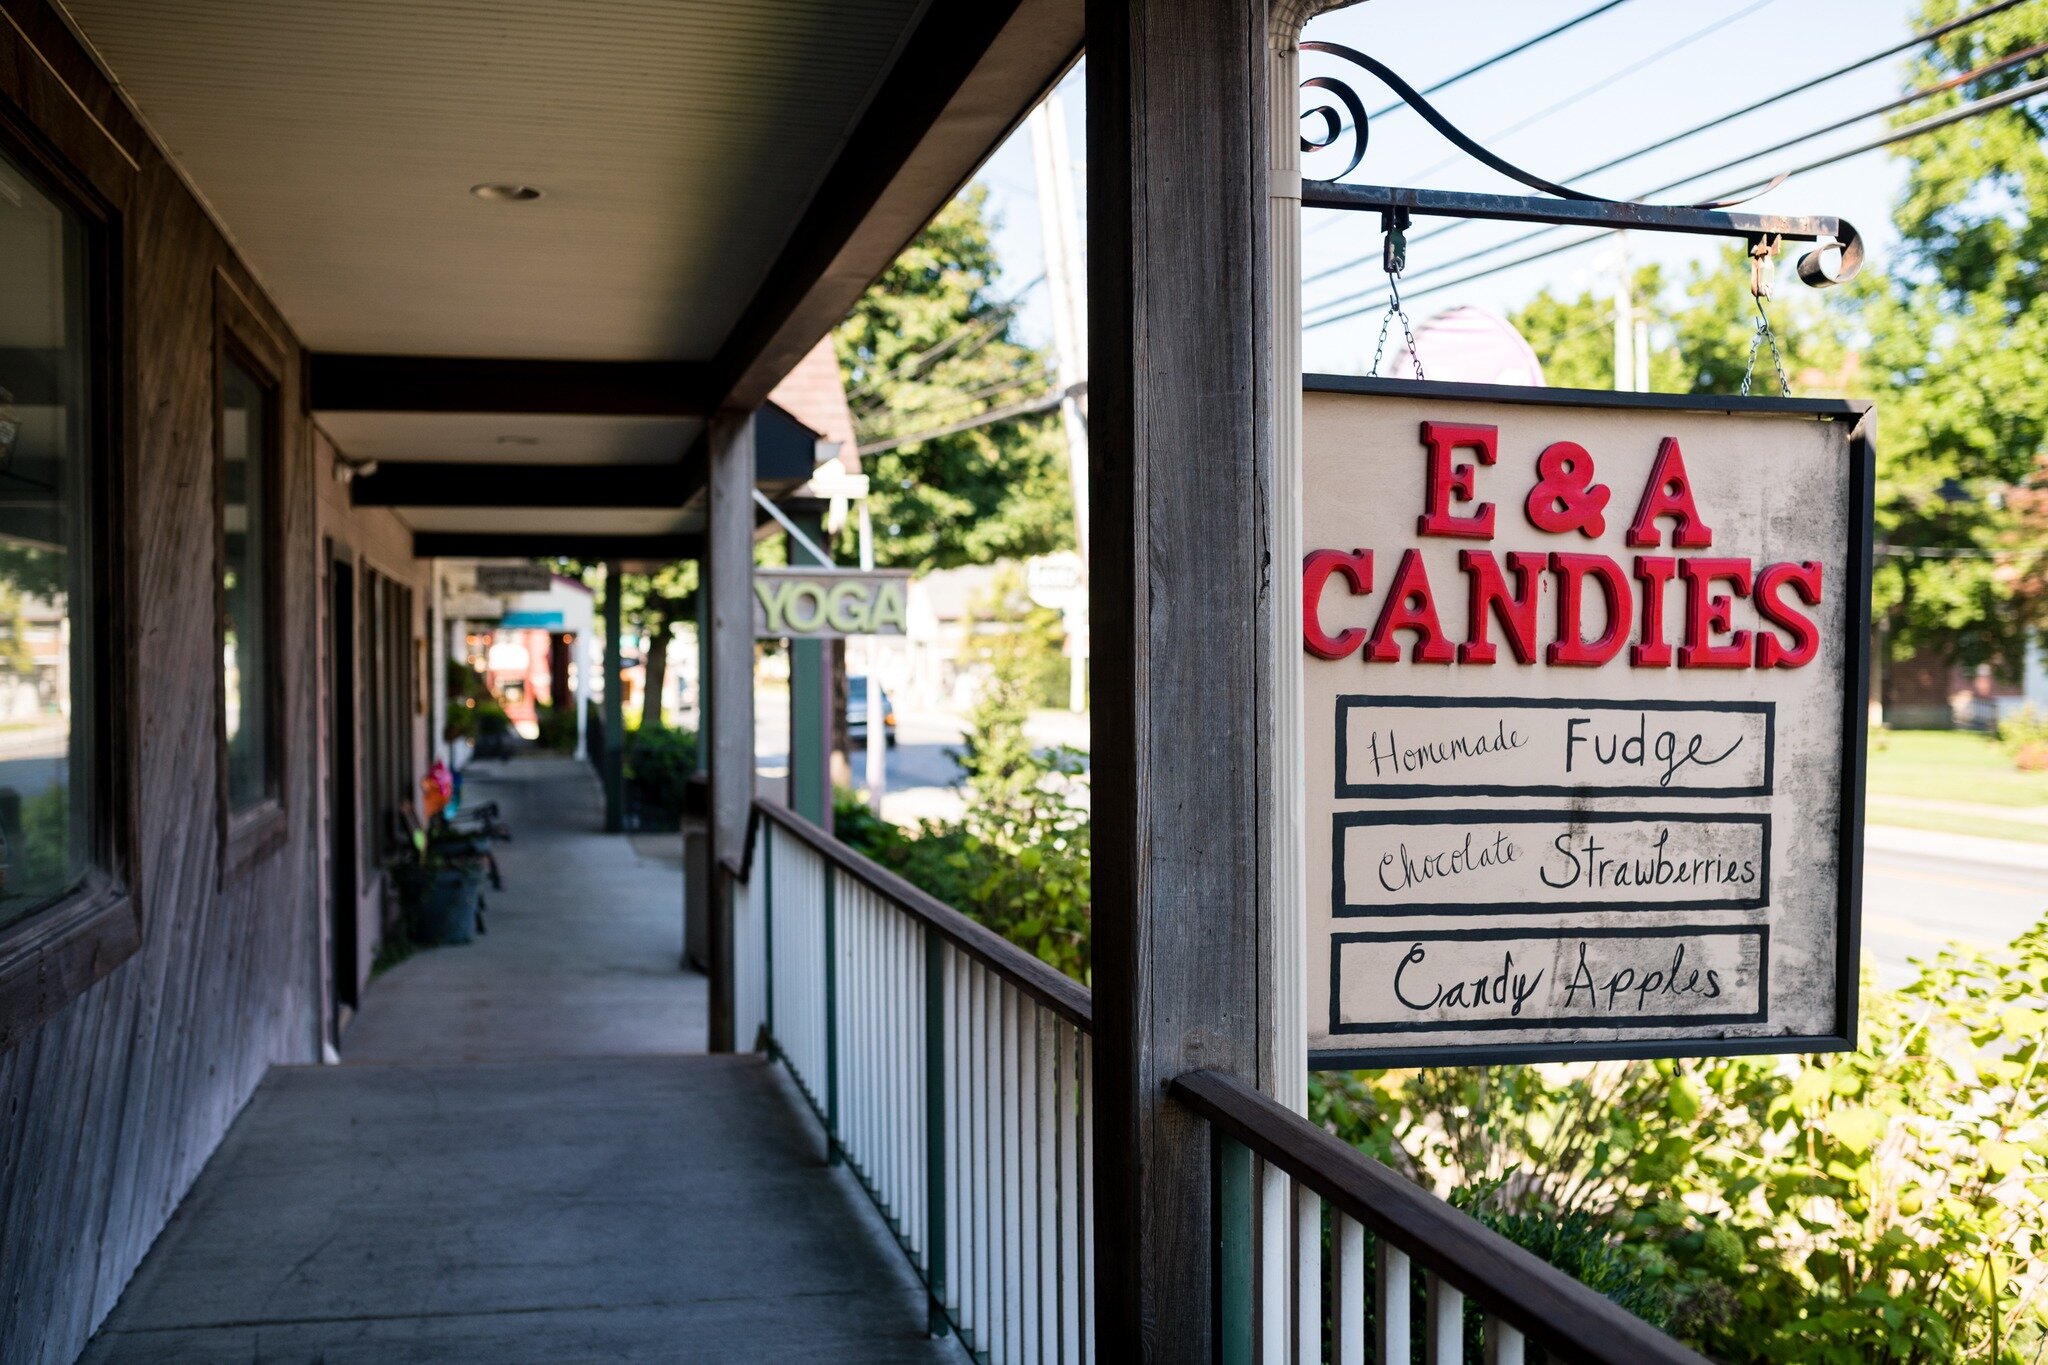 What's your favorite Fall treat? Now's the perfect time of year to pick up a candy apple at E &amp; A Candies.